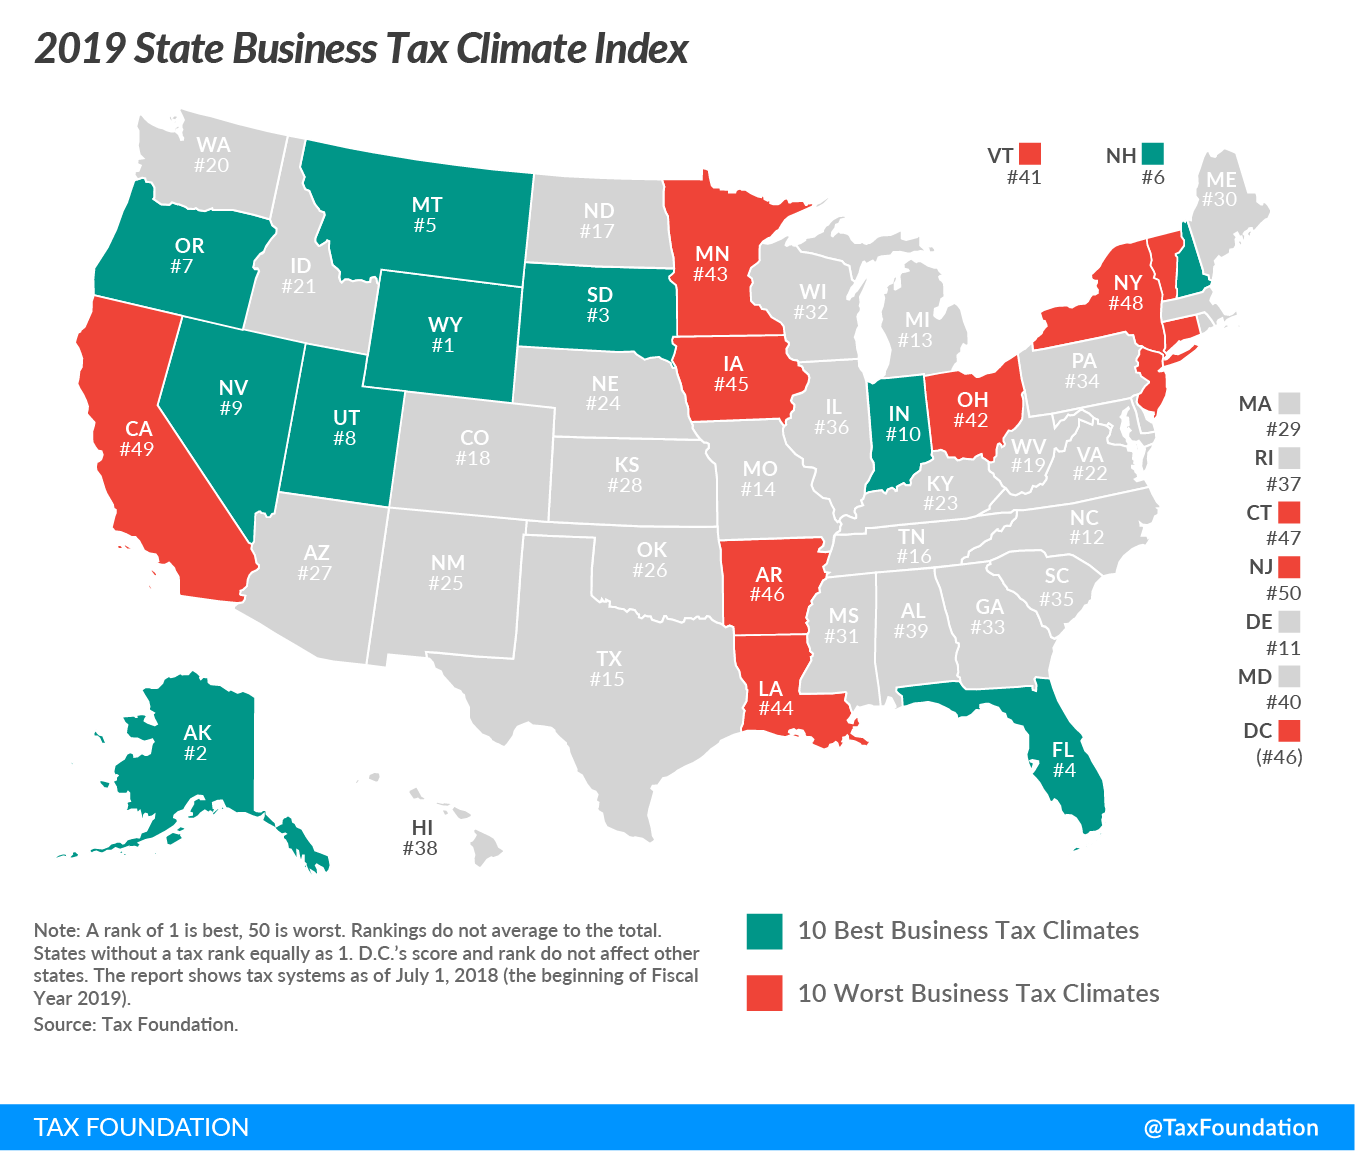 2019 State Business Tax Climate Index